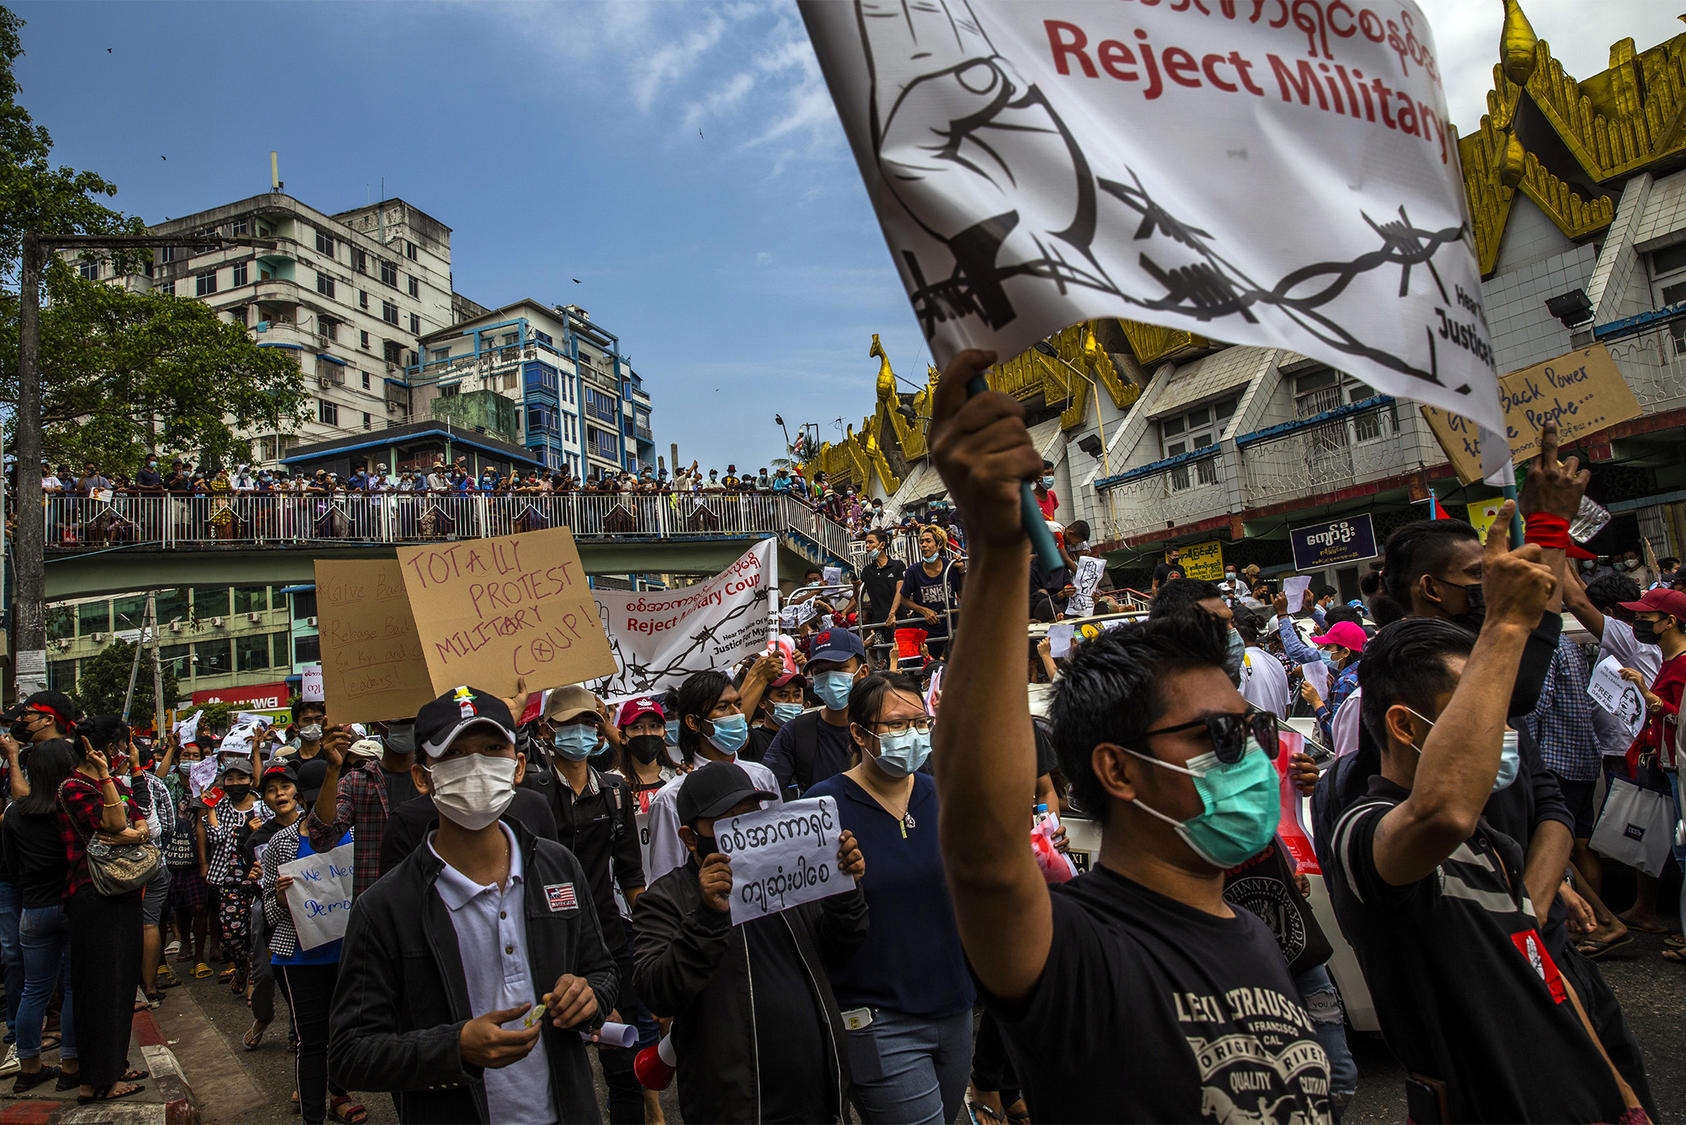 People march in Yangon, Myanmar, on Monday, Feb. 8, 2021, in protest to the recent military coup. The military seized power in a coup on Feb. 1, and detained the country’s elected civilian leaders. (The New York Times)